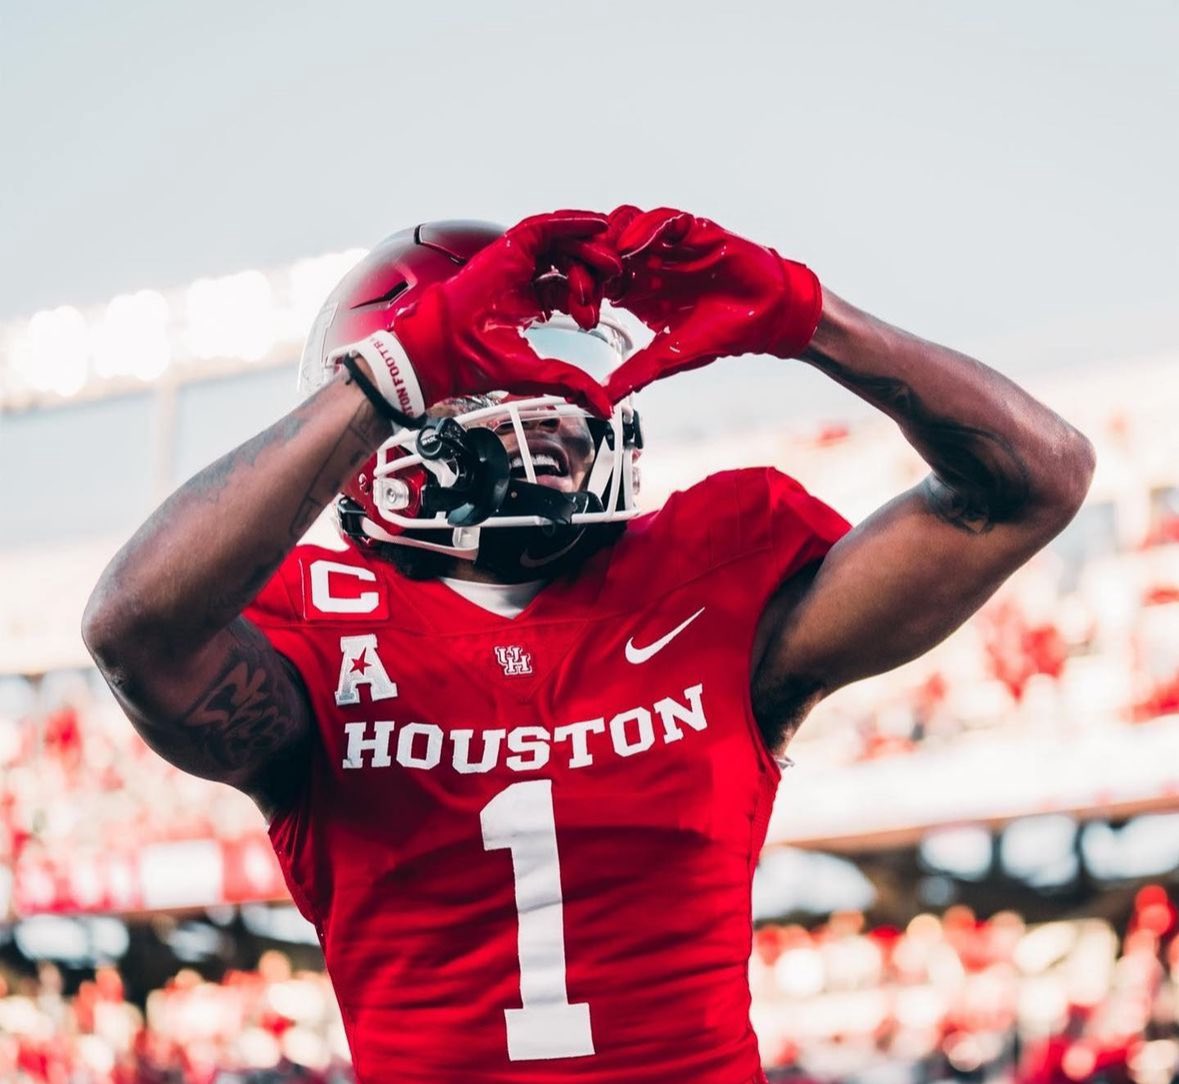 #AGTG I’m truly blessed and honored to receive an P4 offer from The University of Houston! @CoachShawnBell @CoachWEFritz 

@Coach_LaFavers @RPHS_FB @samspiegs @MarshallRivals